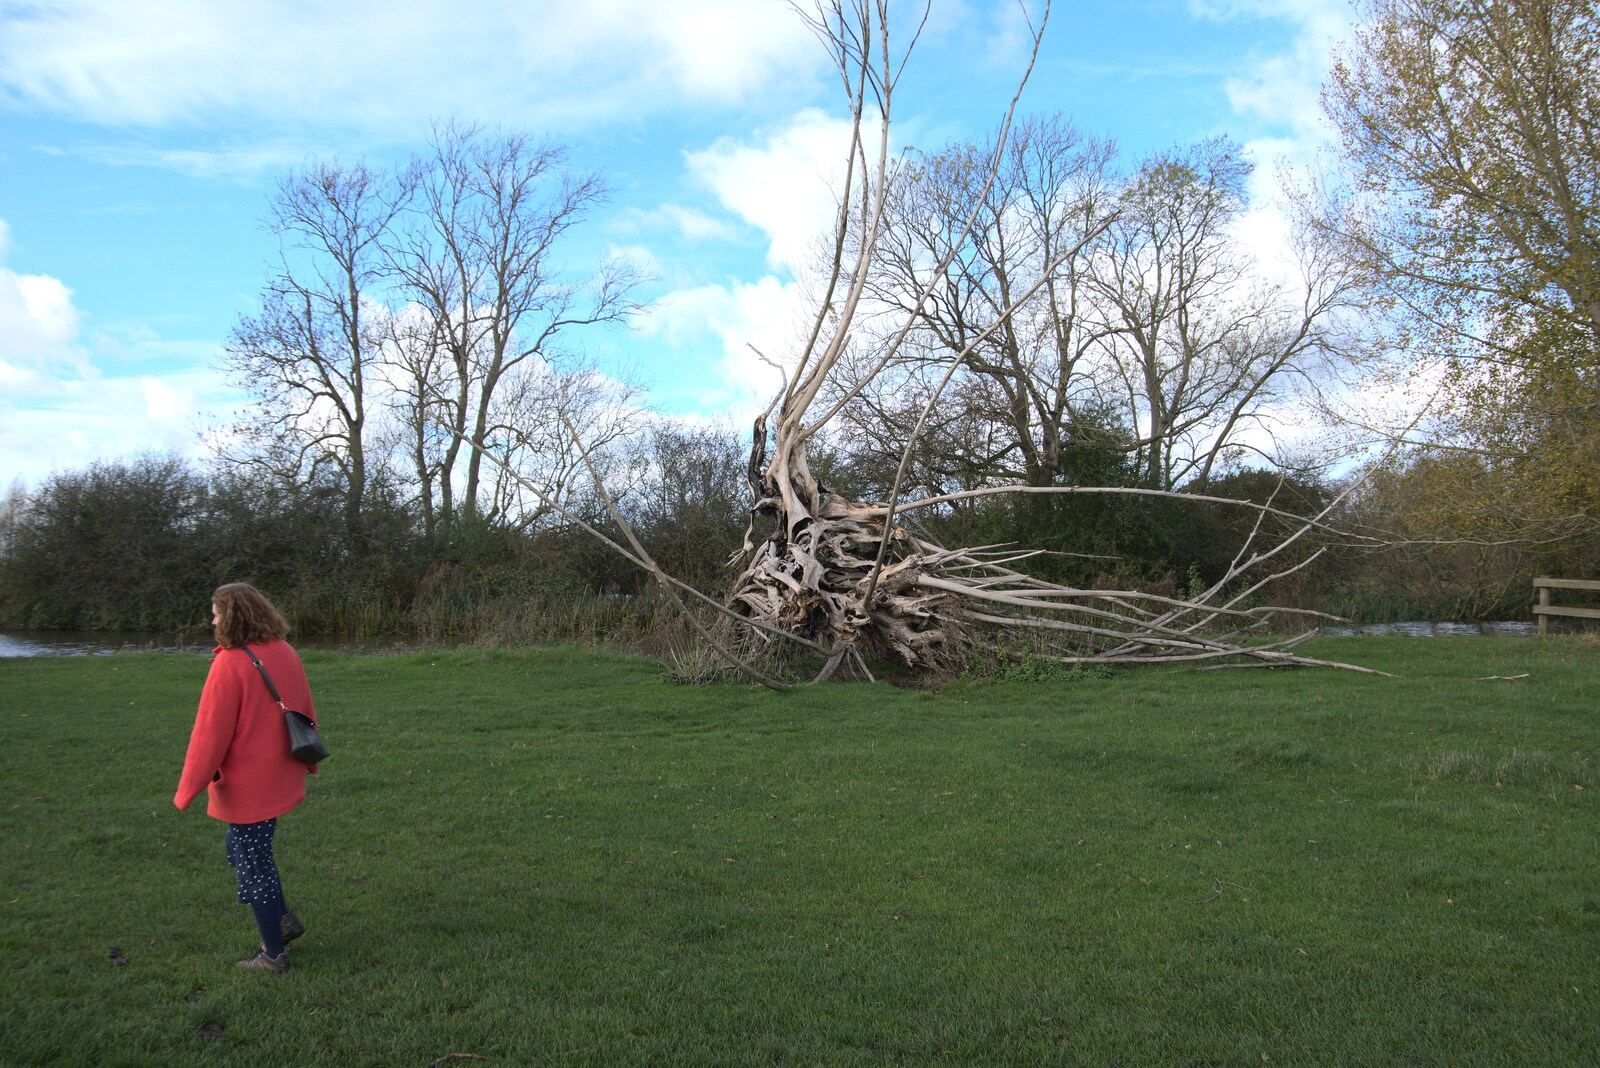 A Postcard from Flatford and Dedham, Suffolk and Essex, 9th November 2022: Isobel roams around near a tree skeleton